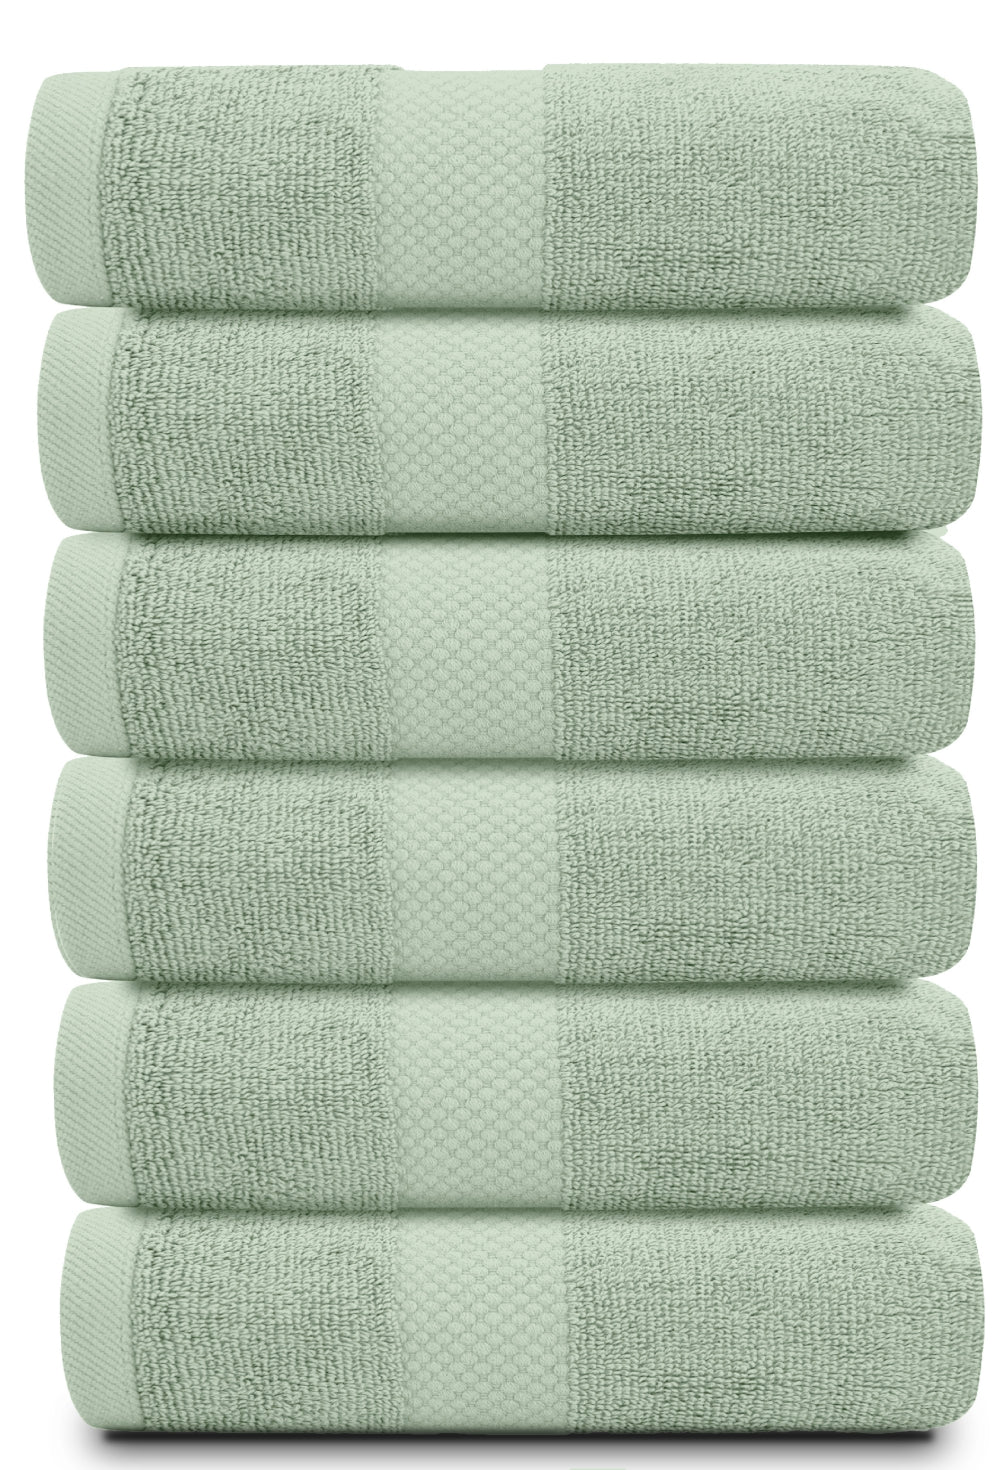 3 new Nestwell™ Hygro 100% Cotton 16x28 HAND Towels LAUREL WREATH GREEN  color